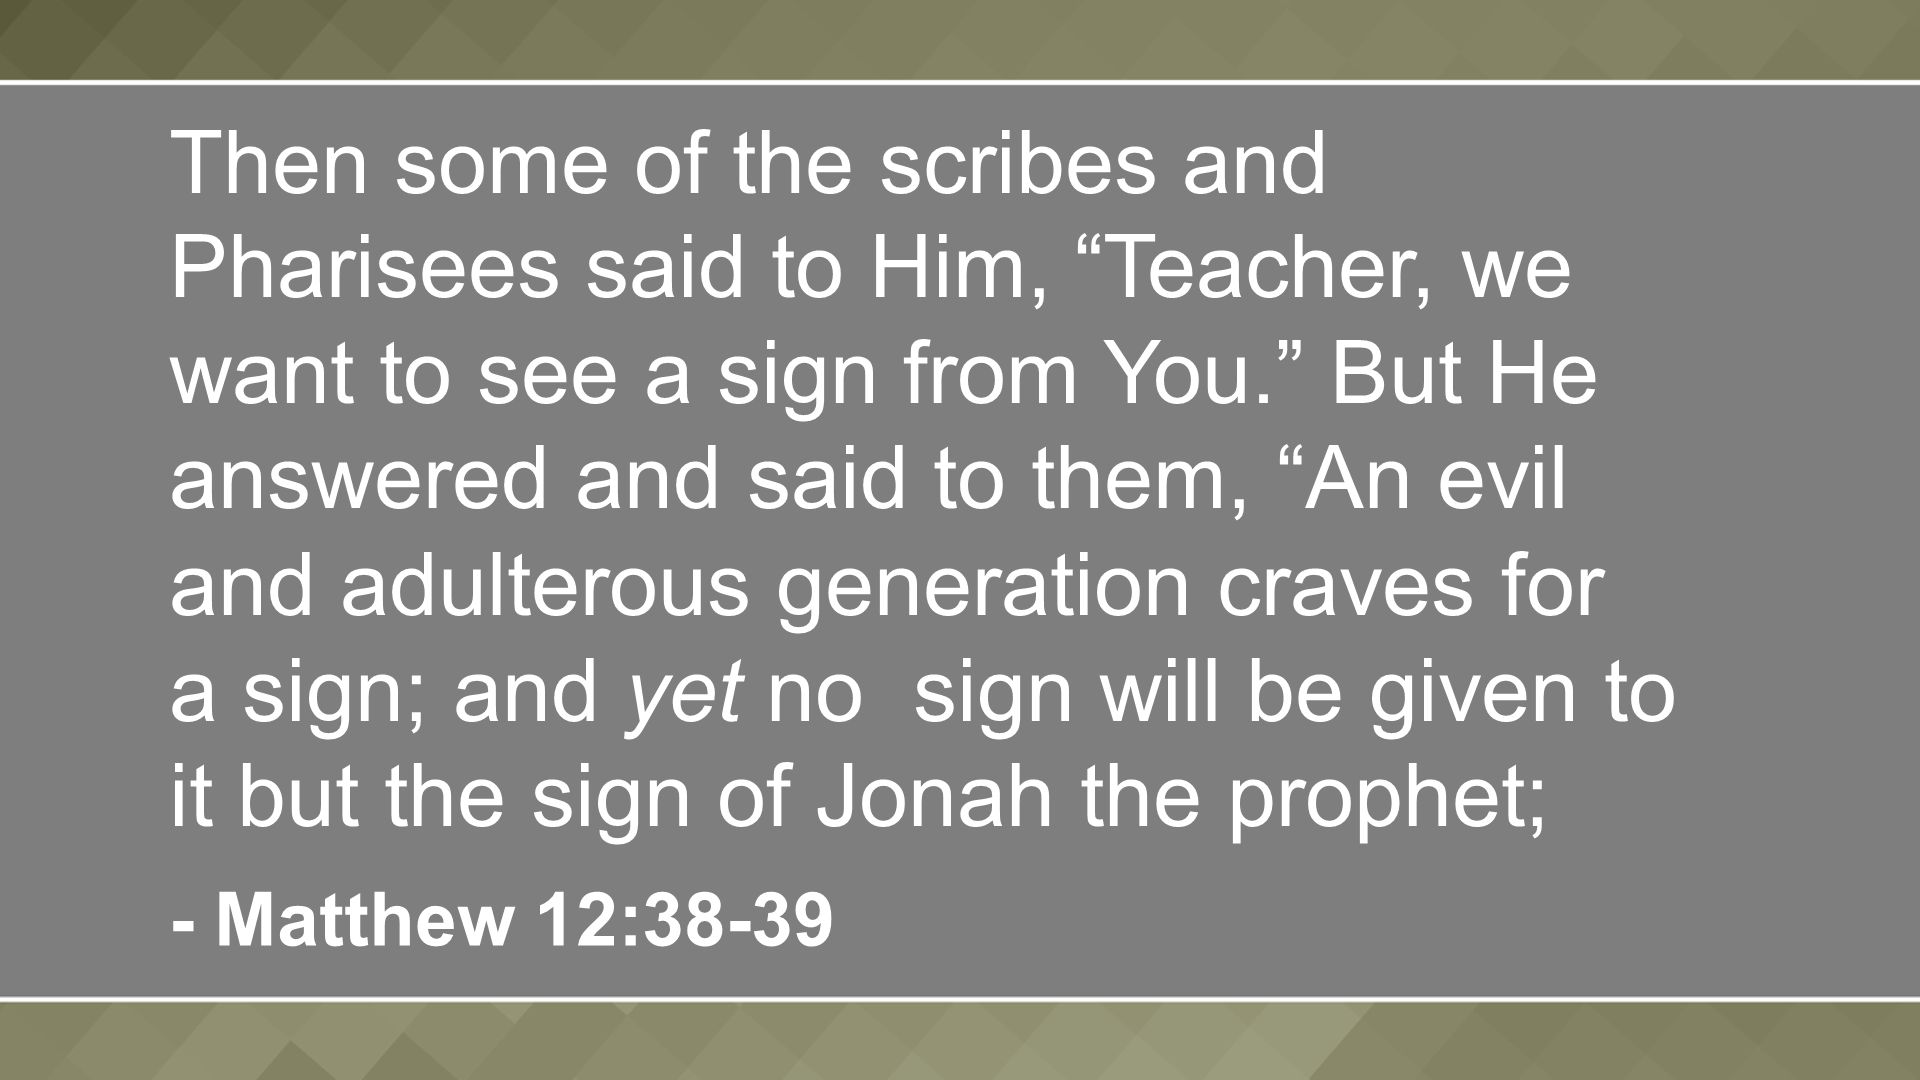 Then some of the scribes and Pharisees said to Him, Teacher, we want to see a sign from You. But He answered and said to them, An evil and adulterous generation craves for a sign; and yet no sign will be given to it but the sign of Jonah the prophet; - Matthew 12:38-39